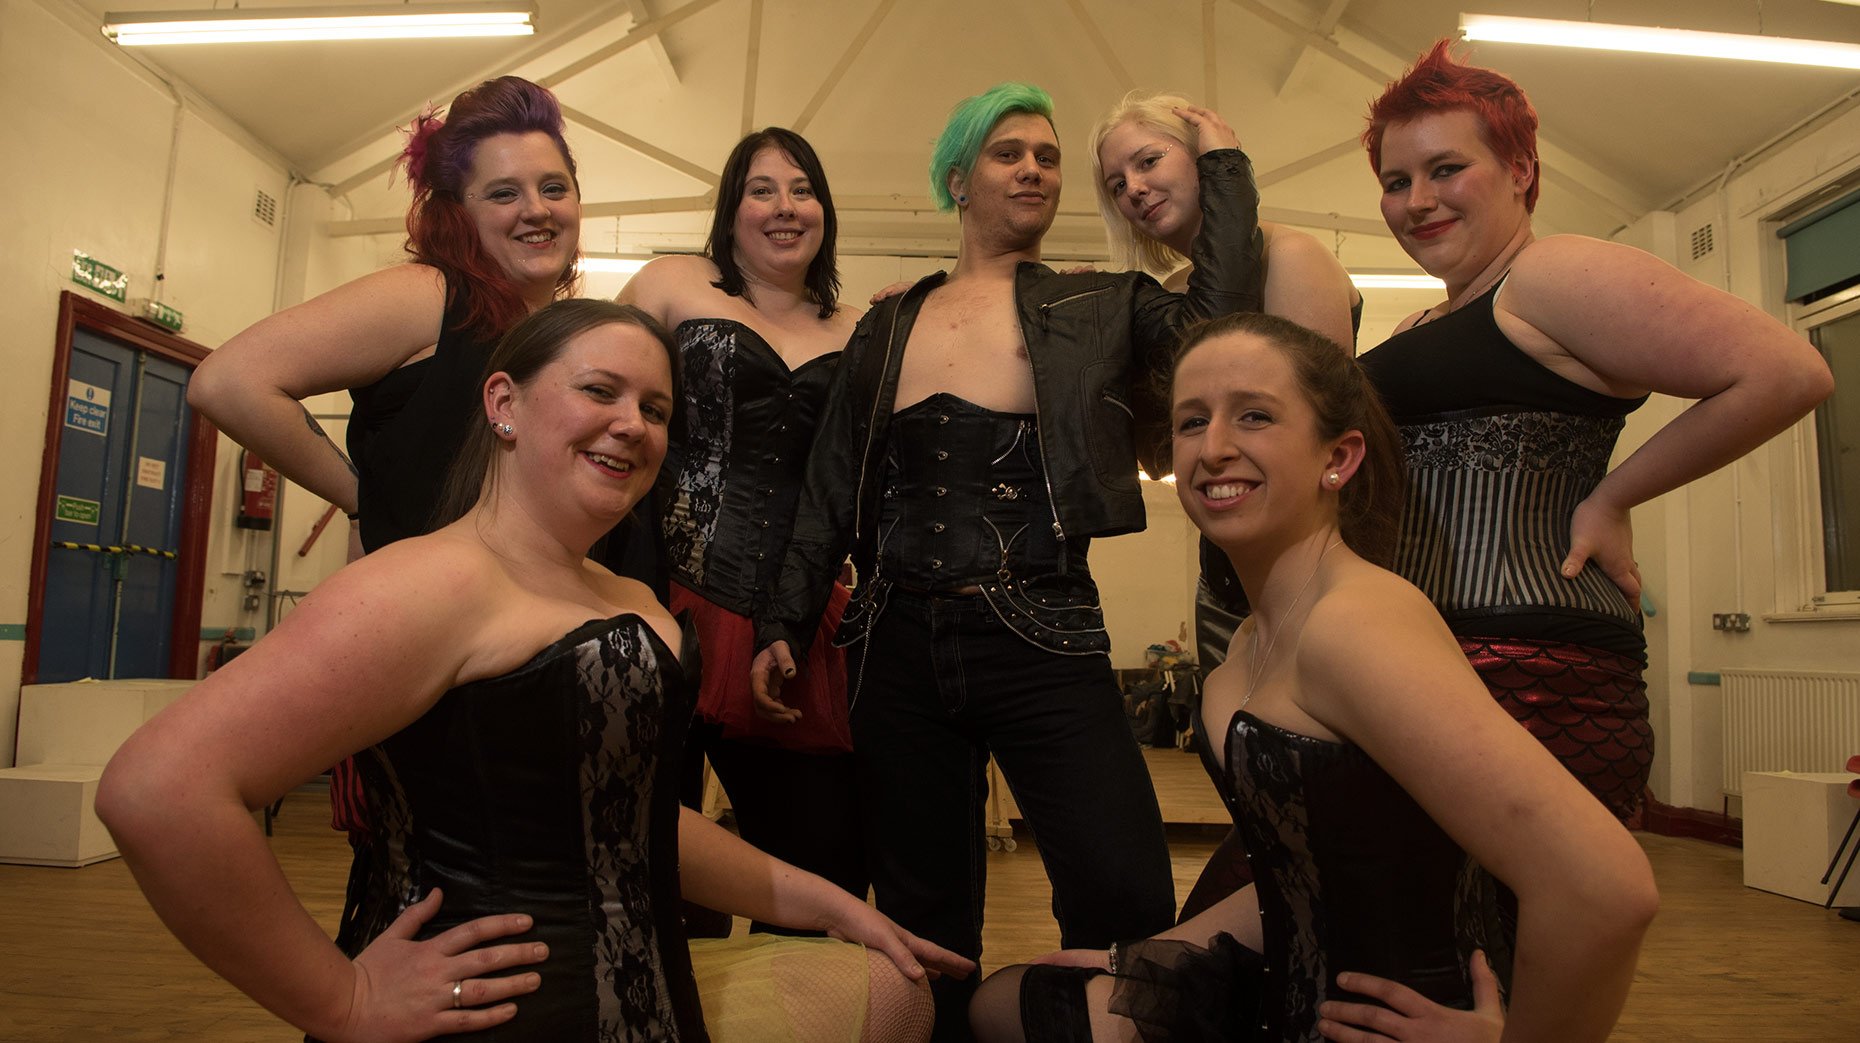 Teaser Burlesque Troupe Gives Sneak Peek At Lincolns Latest Fitness Trend